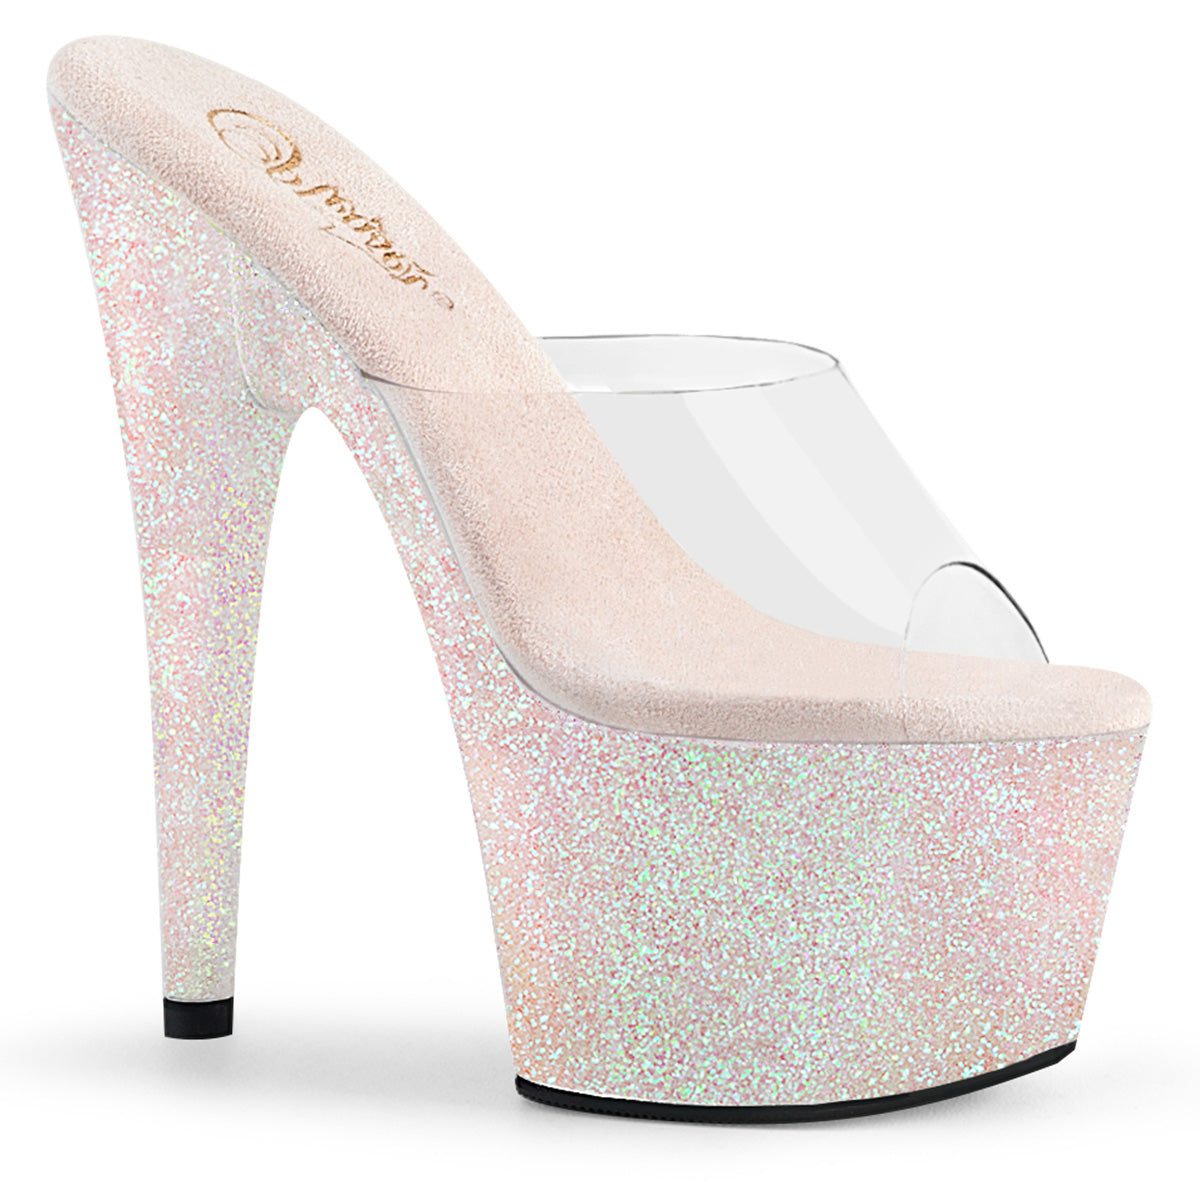 ADORE-701HMG Clear & Pink Peep Toe High Heel Clear & Pink Multi view 1